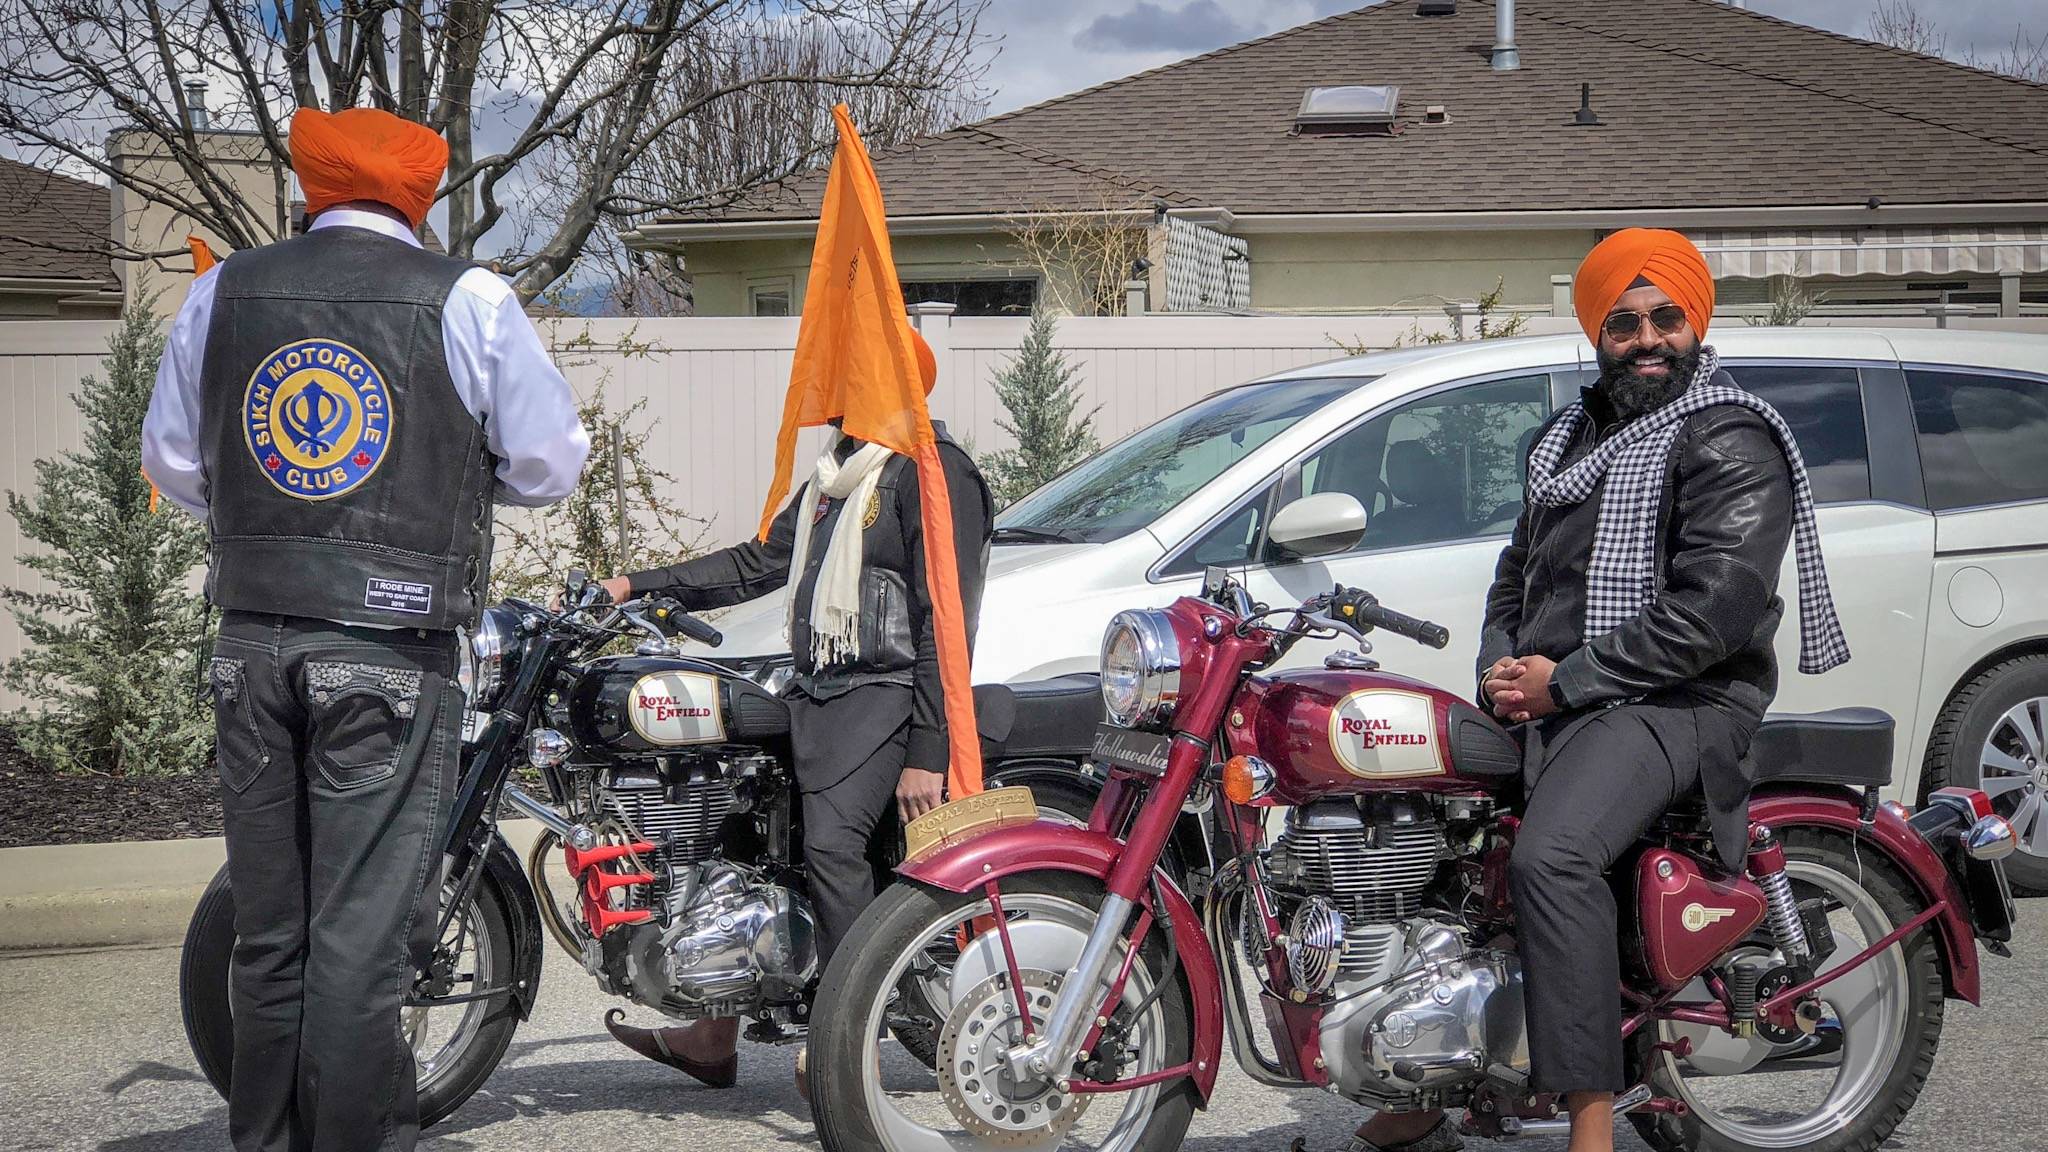 The Sikh motorcycle club led the procession as the Penticton Sikh Temple celebrated Vaisakhi with a Nagar Kirtan procession. Steve Kidd/Western News